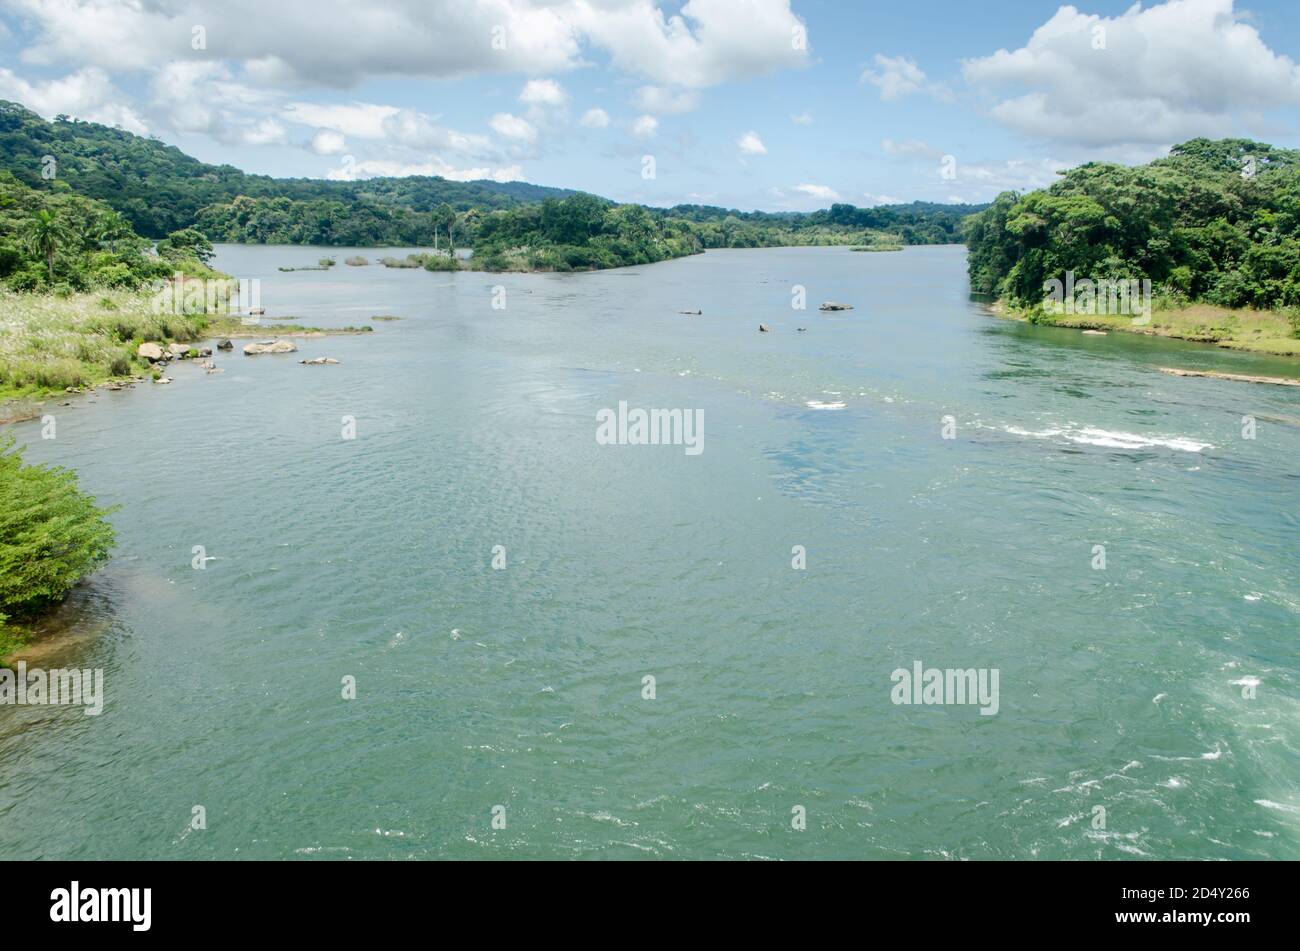 The Chagres River in Panama is crucial, renowned for its historical, ecological significance, and its role in managing water for the Panama Canal. Stock Photo